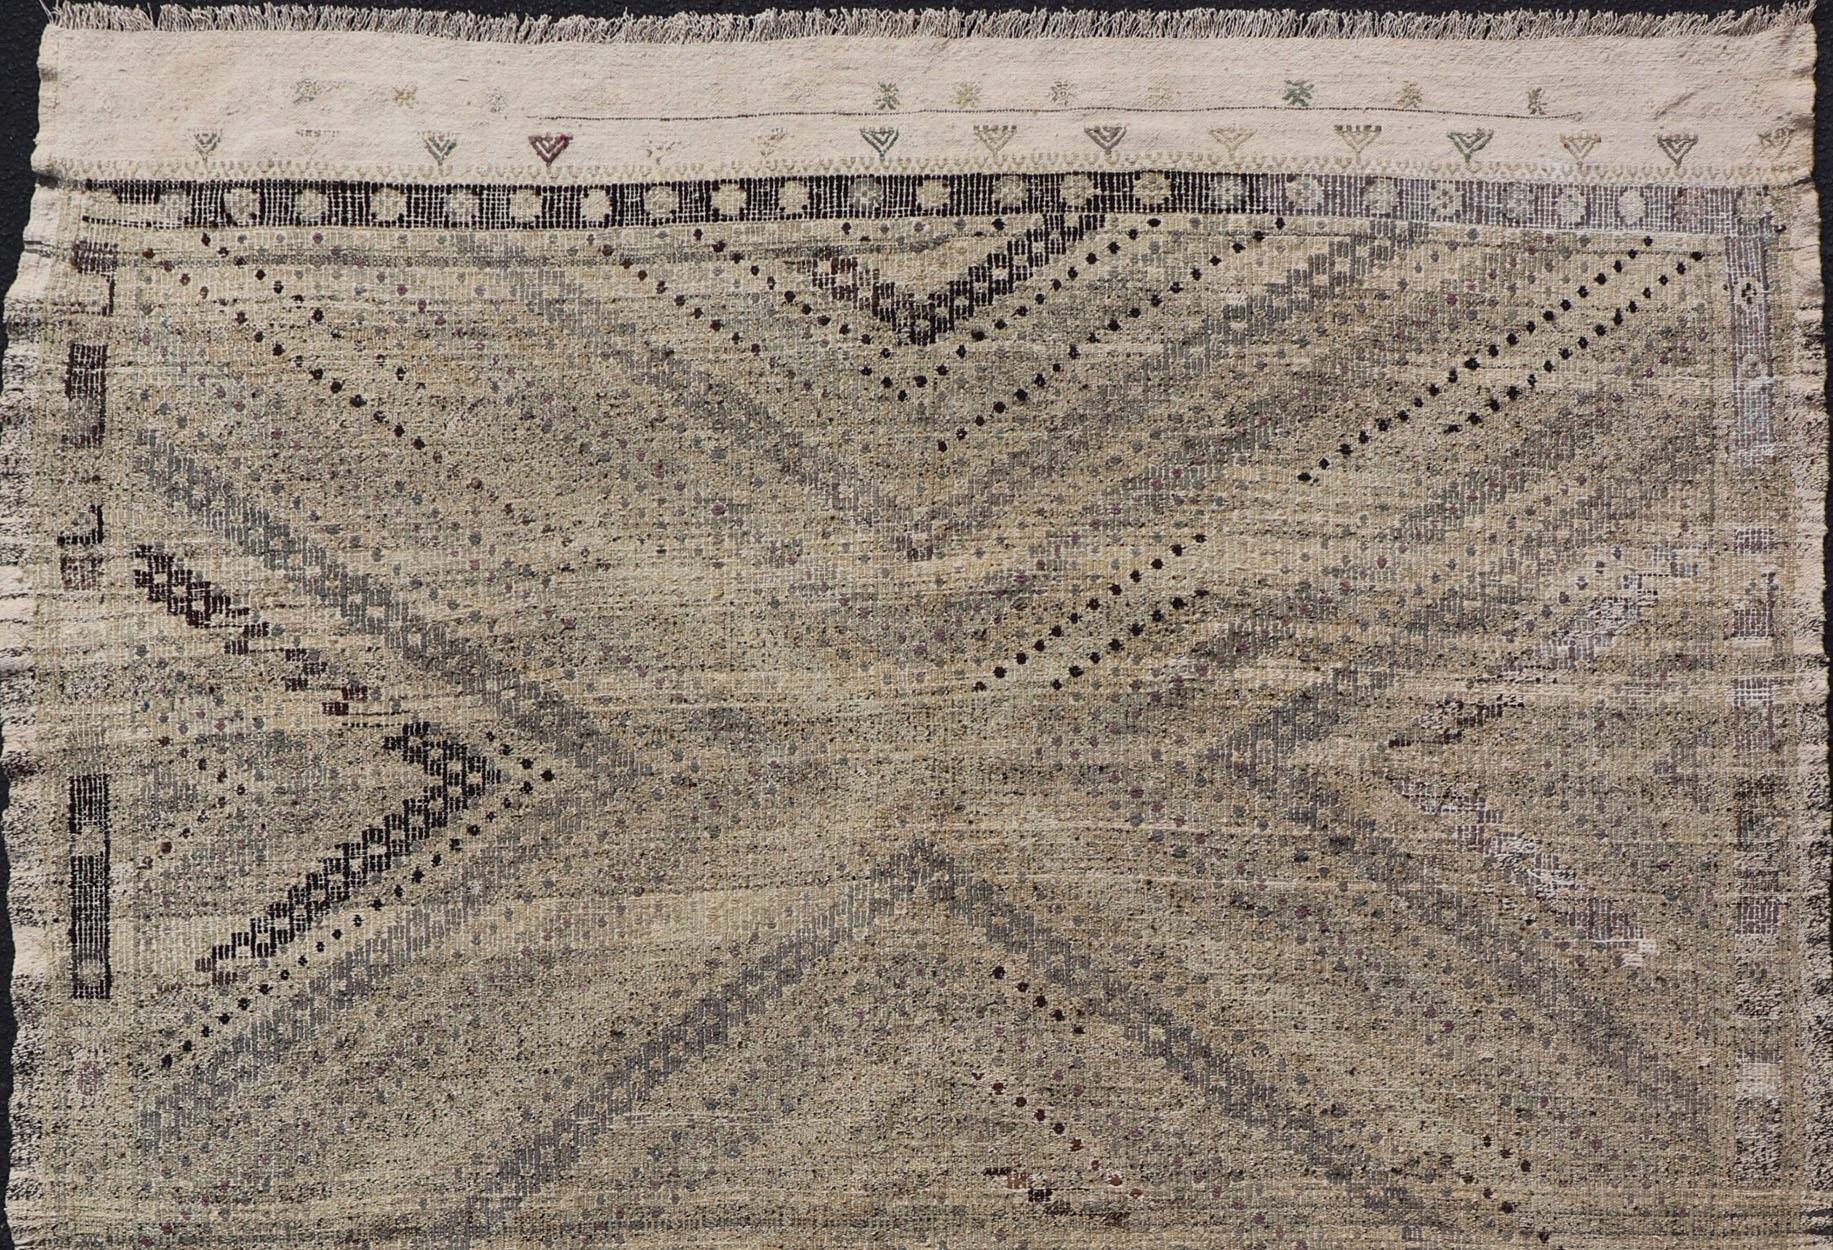 Geometric design vintage Kilim rug from Turkey in neutral, muted tones, rug TU-NED-1018, country of origin / type: Turkey / Kilim, circa 1960.

Measures:6'9 x 9'8

Featuring a beautiful geometric design rendered in various neutral color tones,